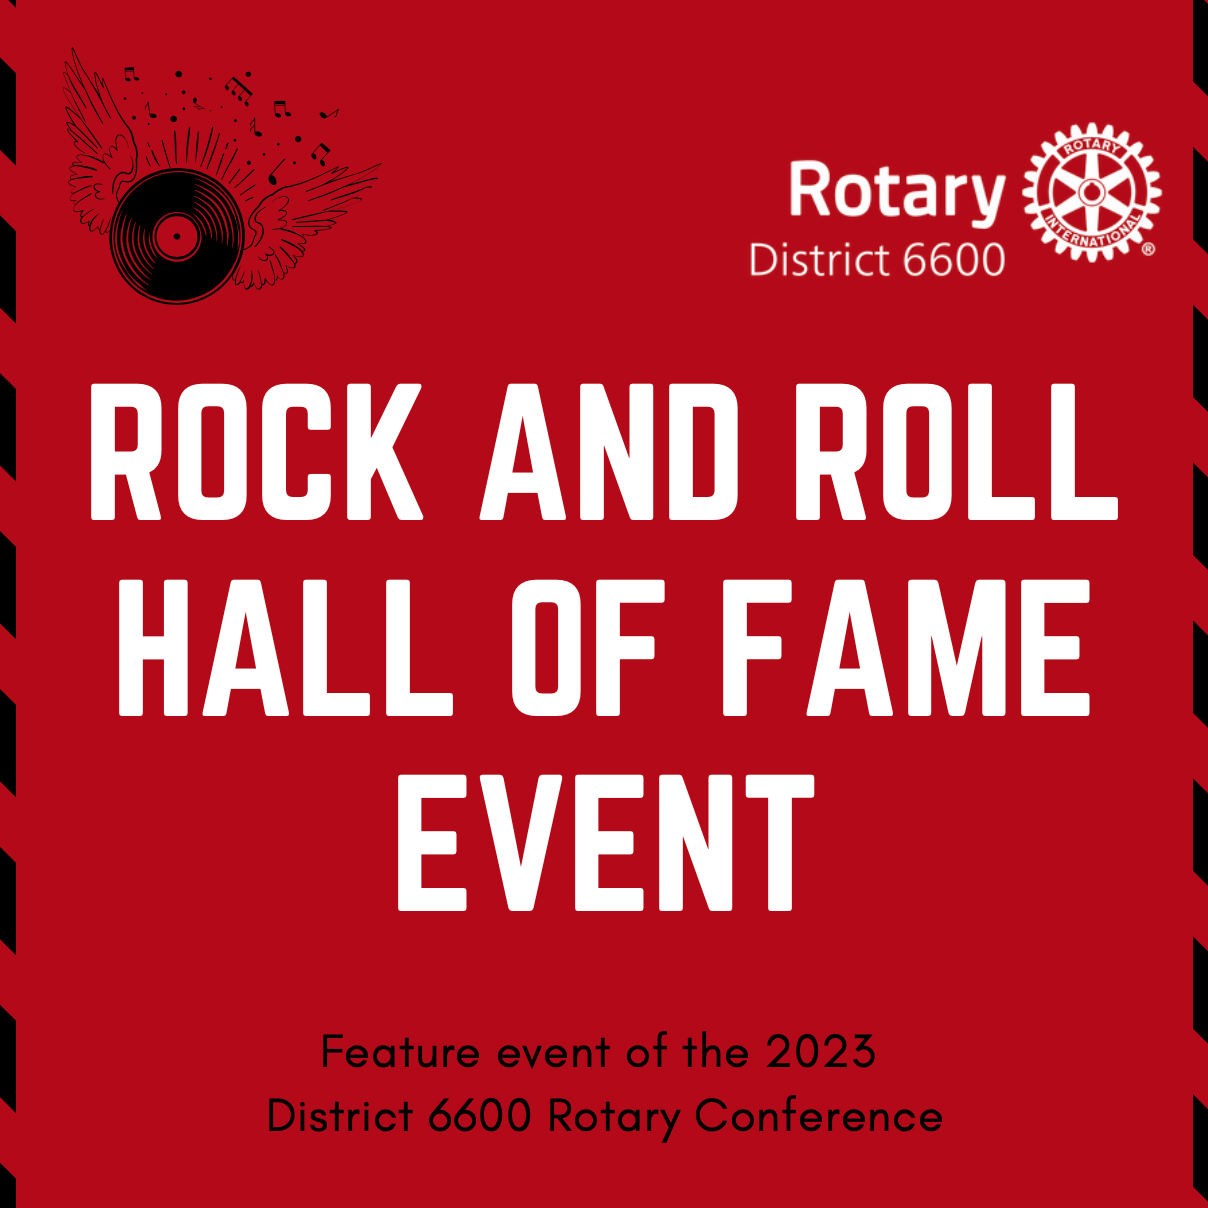 Rock and Roll Hall of Fame Event